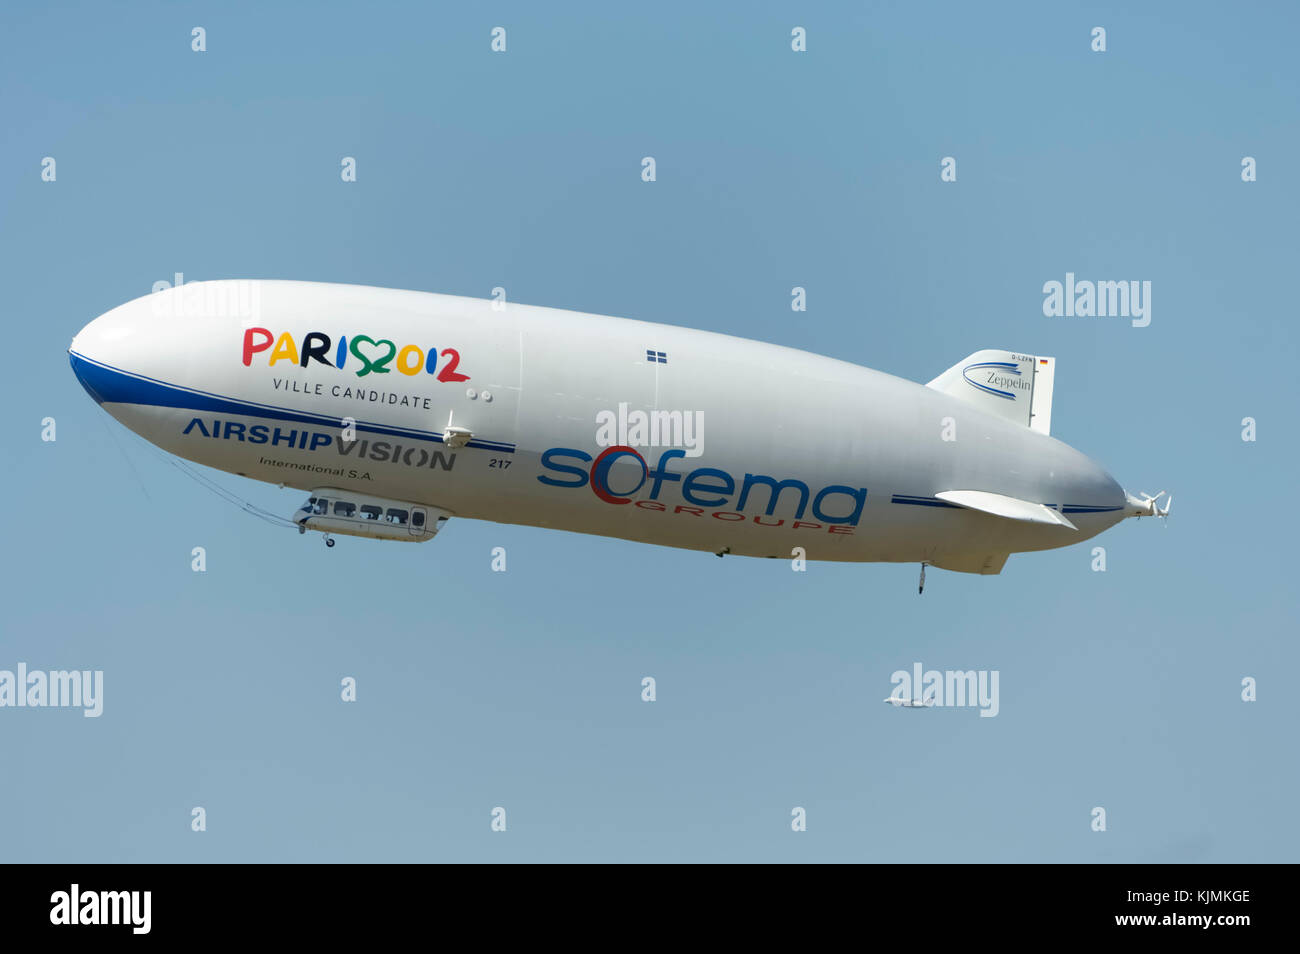 flying-display with adverts for Soferma, Airship Vision International SA and Paris 2012 Olympic Games candidate city at the 2005 Paris AirShow, Salon- Stock Photo